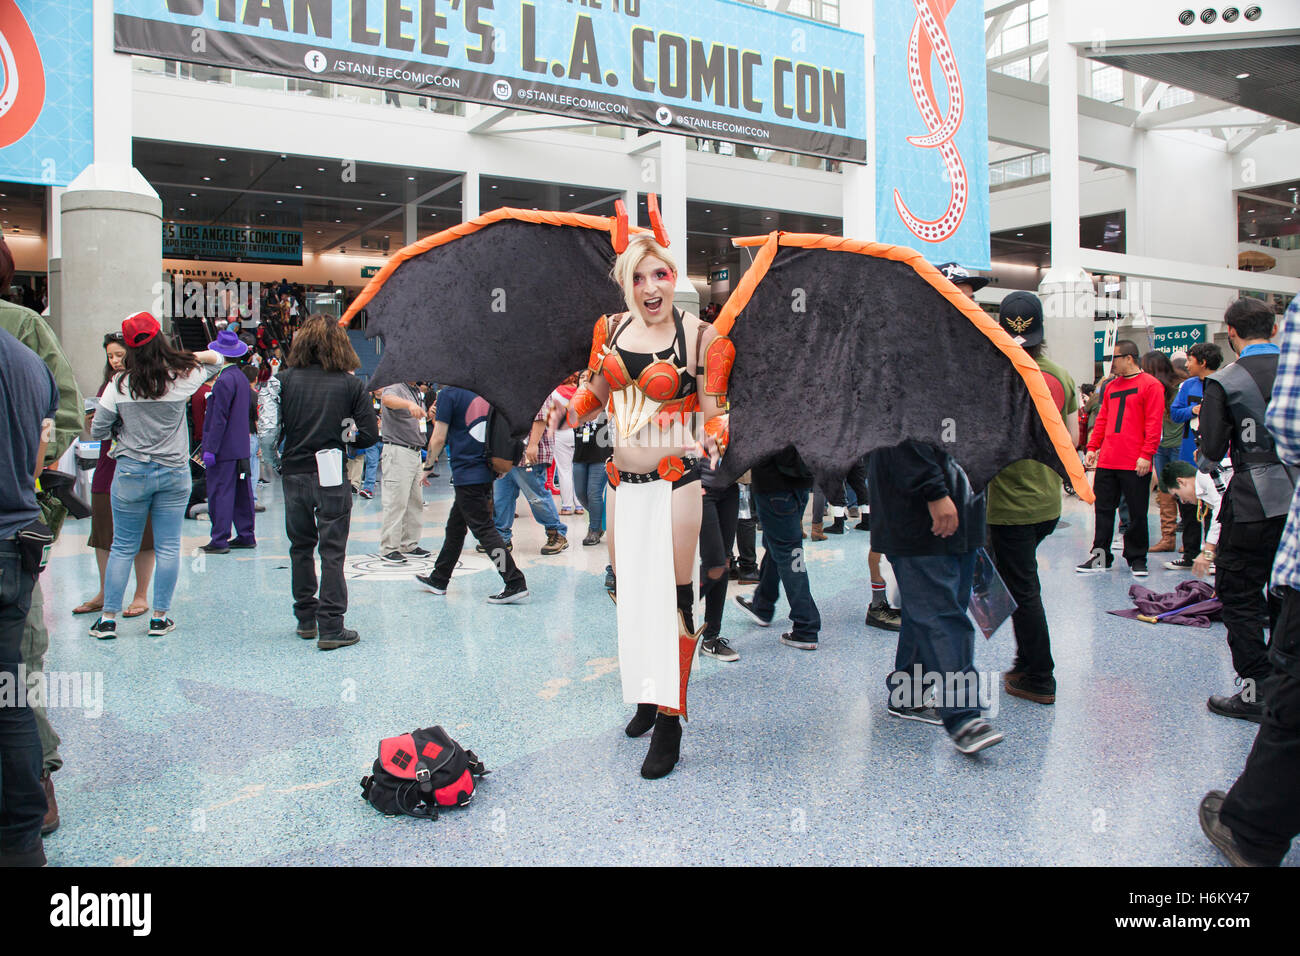 STAN LEE LA COMIC CON: October 29, 2016, Los Angeles, California. Cosplayers and fans come out for the annual convention. Stock Photo